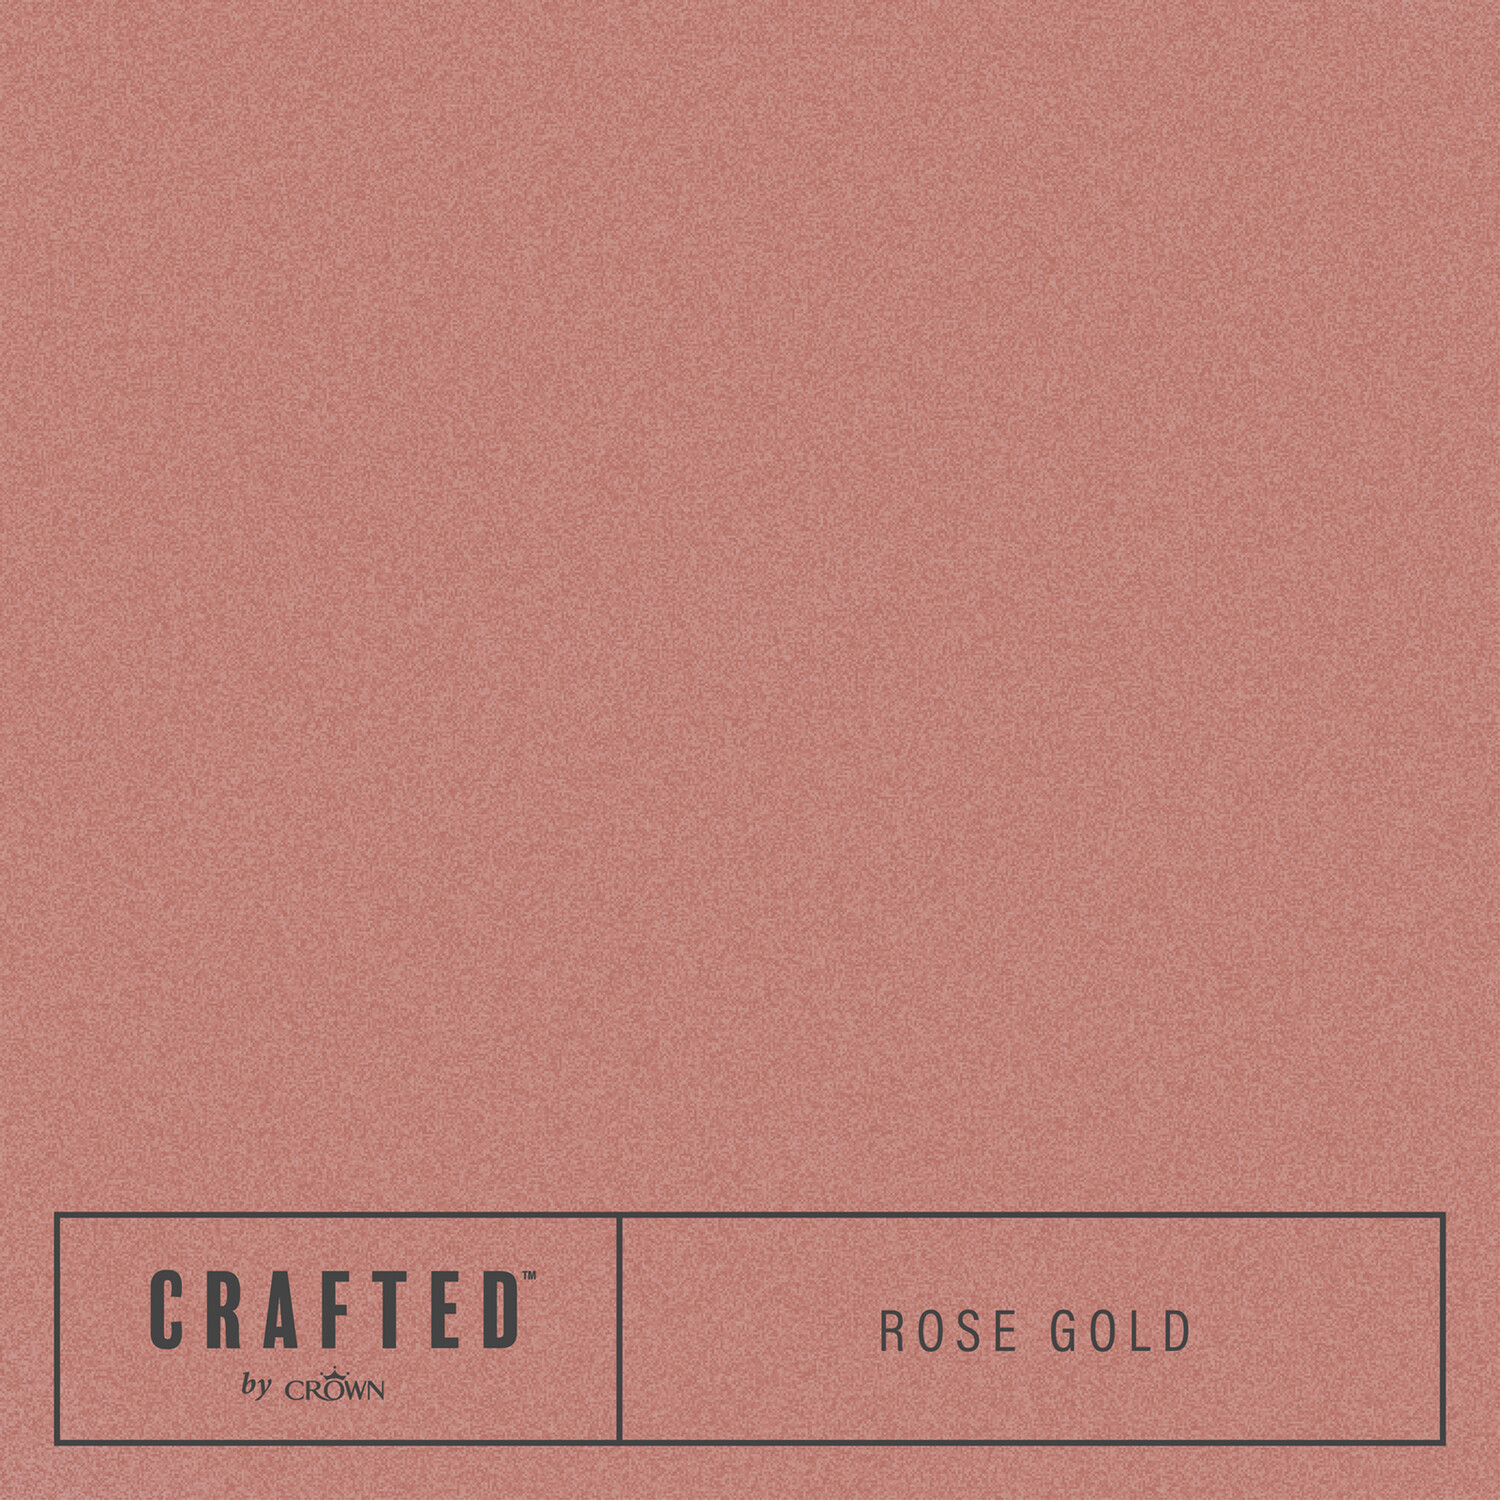 Crown Crafted Walls Wood and Metal Rose Gold Lustrous Metallic Shimmer Emulsion Paint 1.25L Image 5